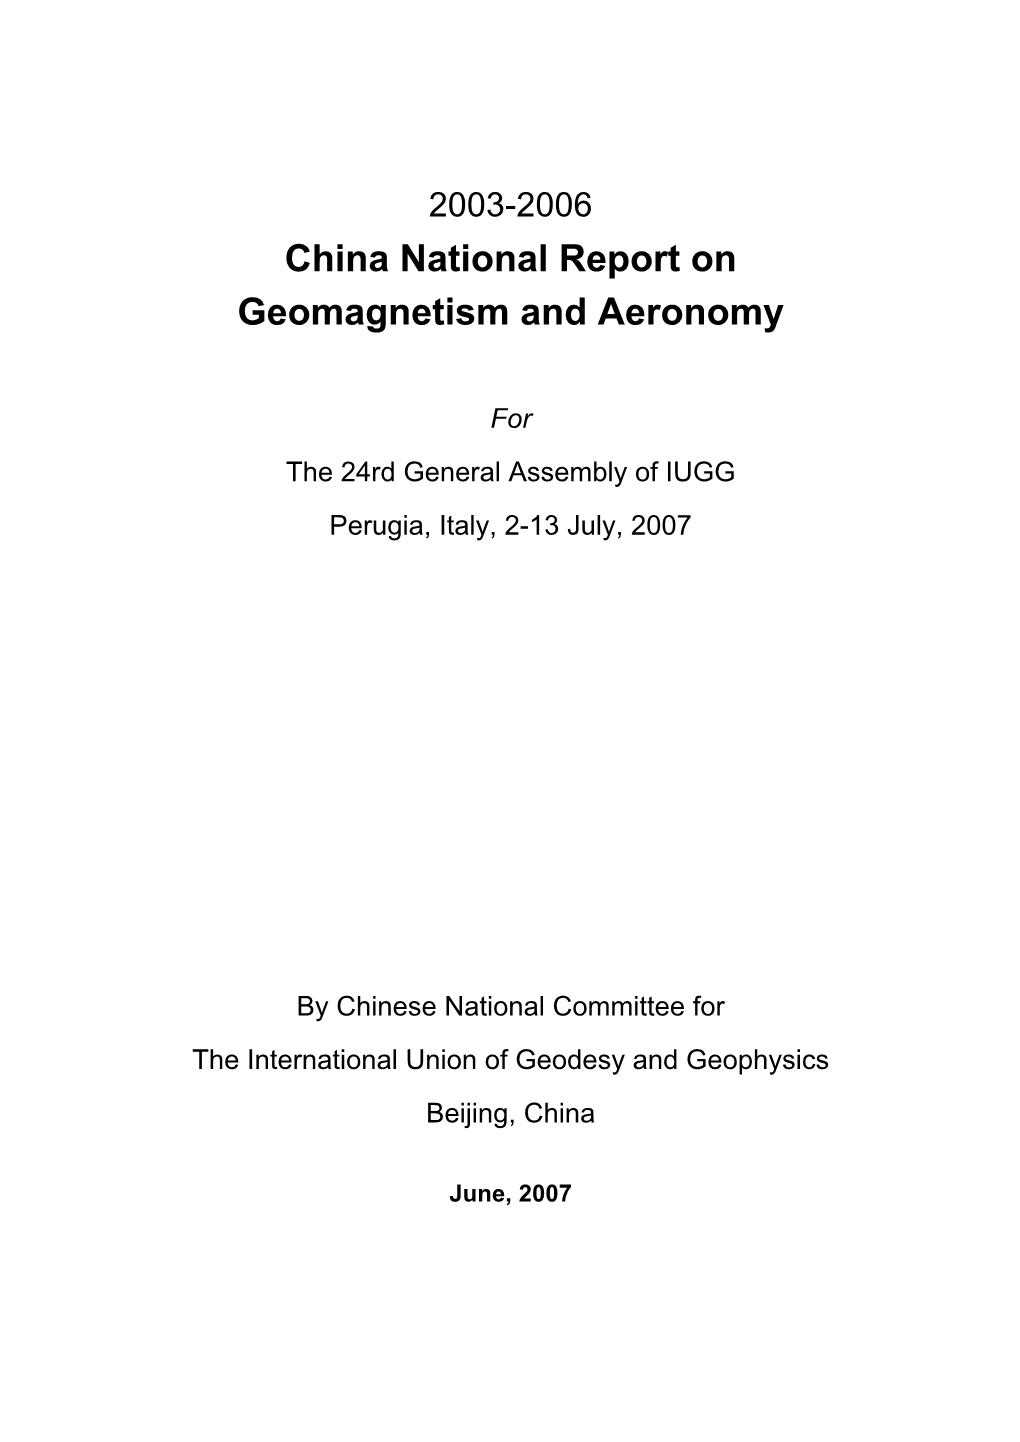 China National Report on Geomagnetism and Aeronomy